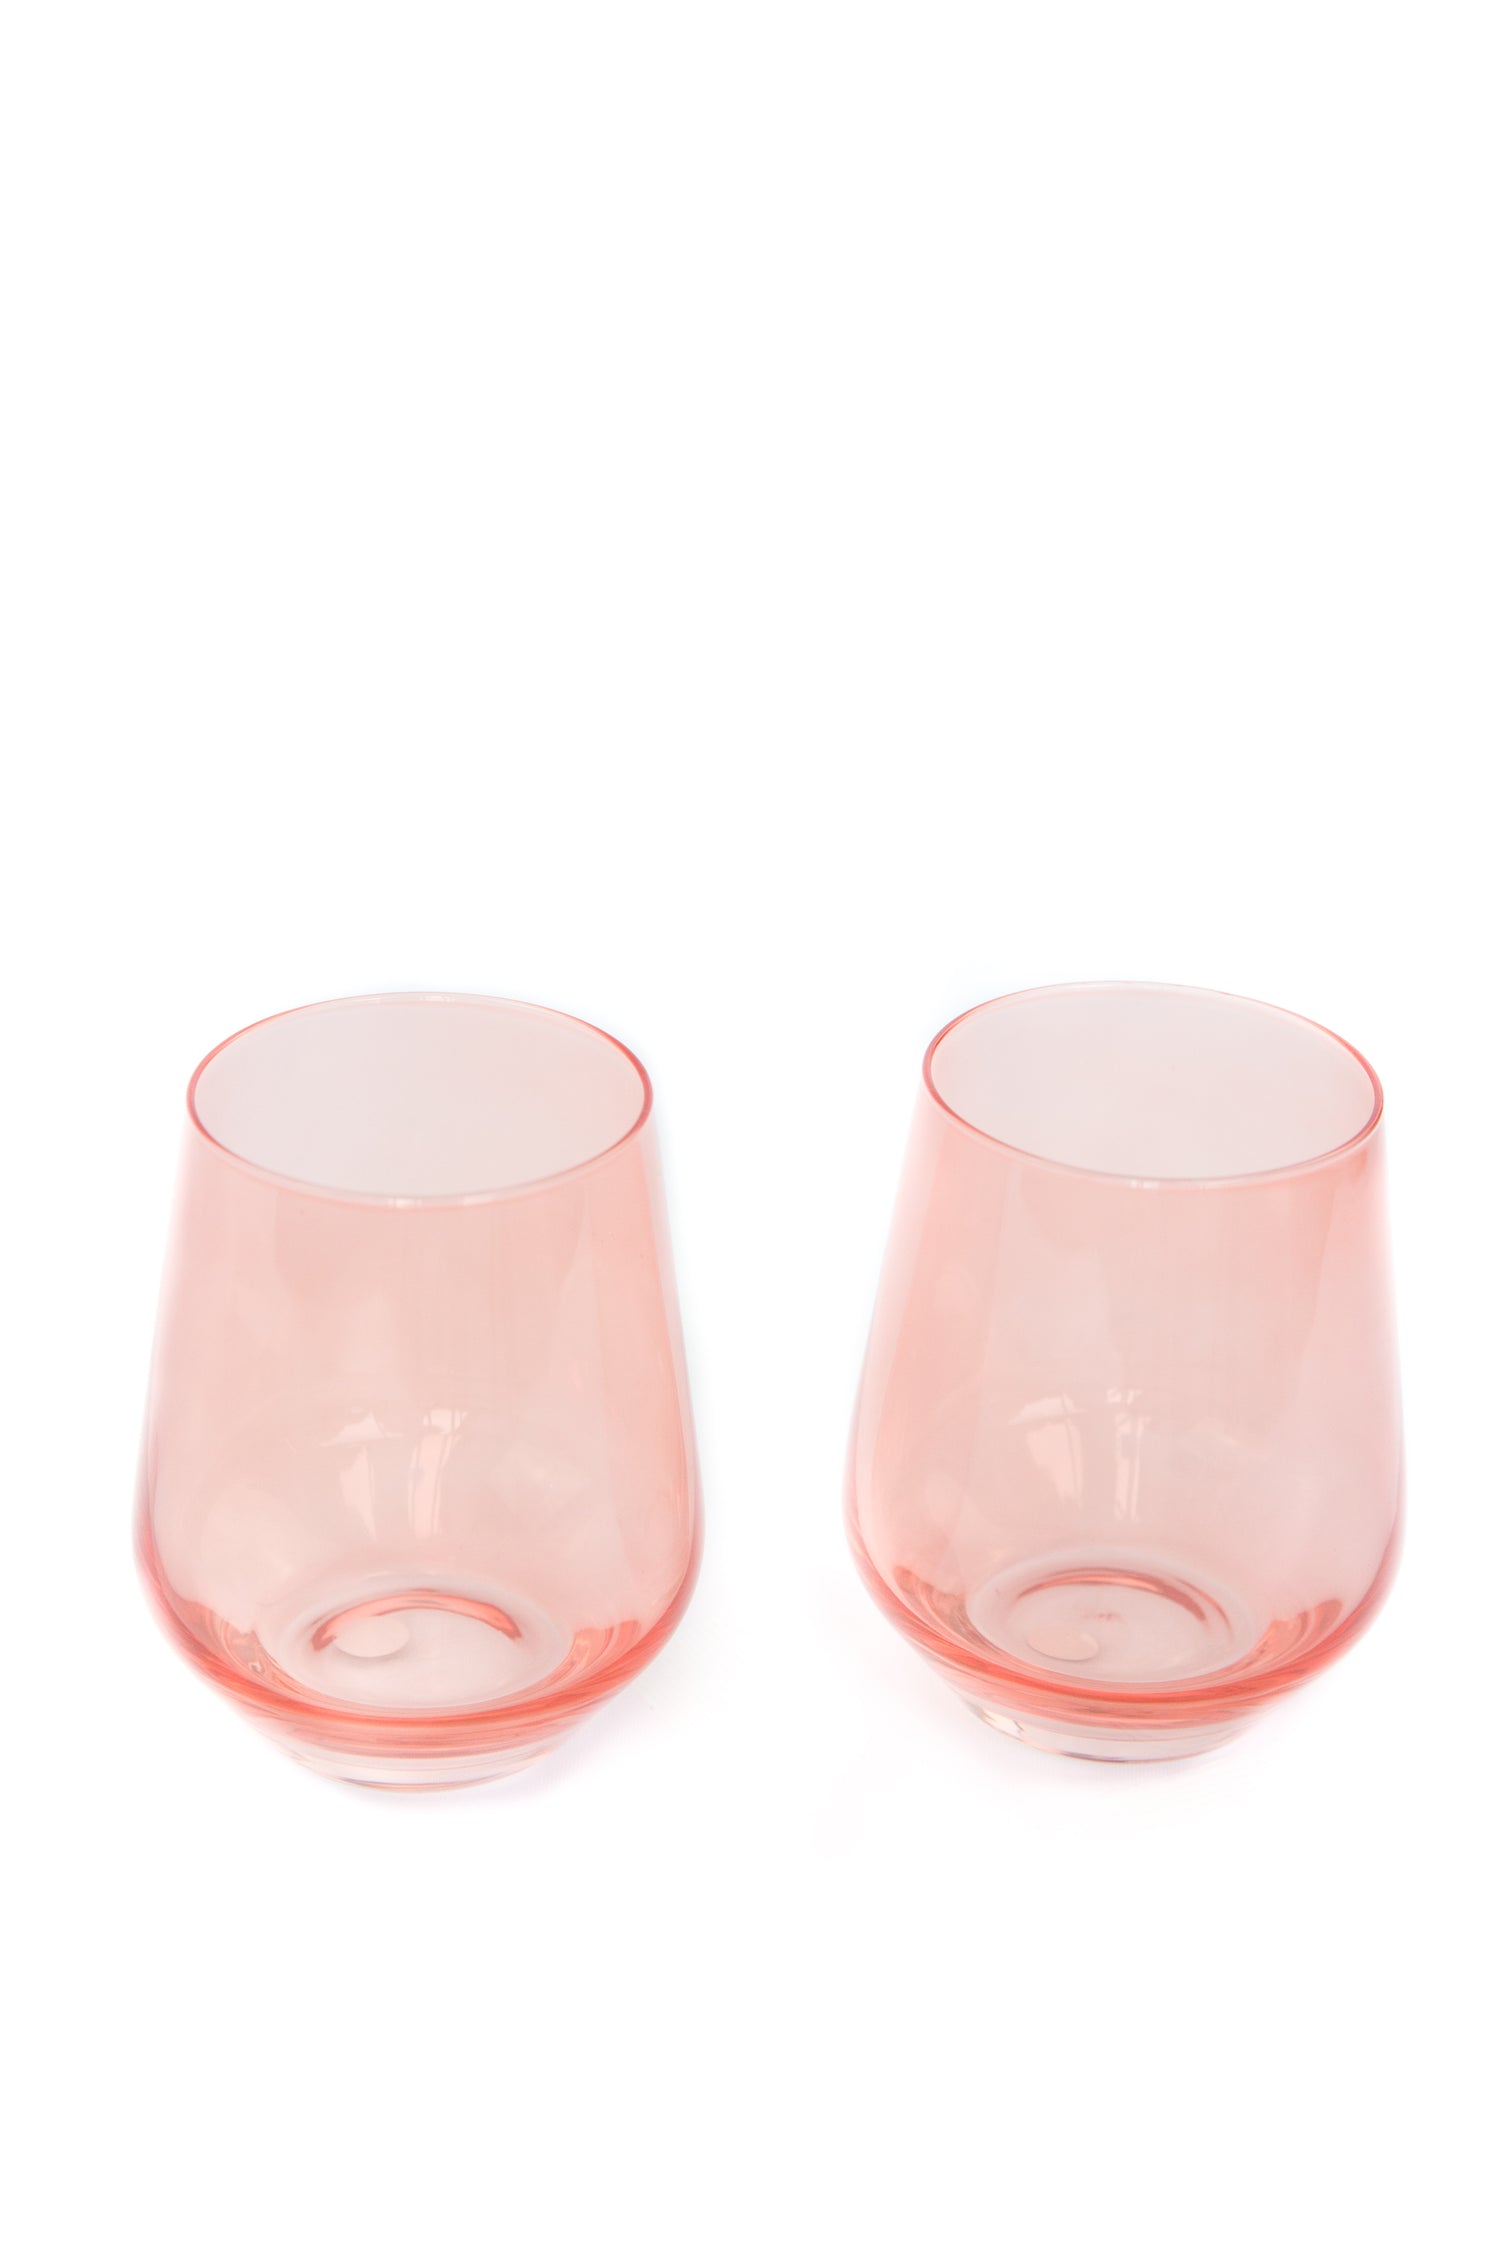 Estelle Colored Wine Stemless - Set of 2 {Coral Peach Pink}